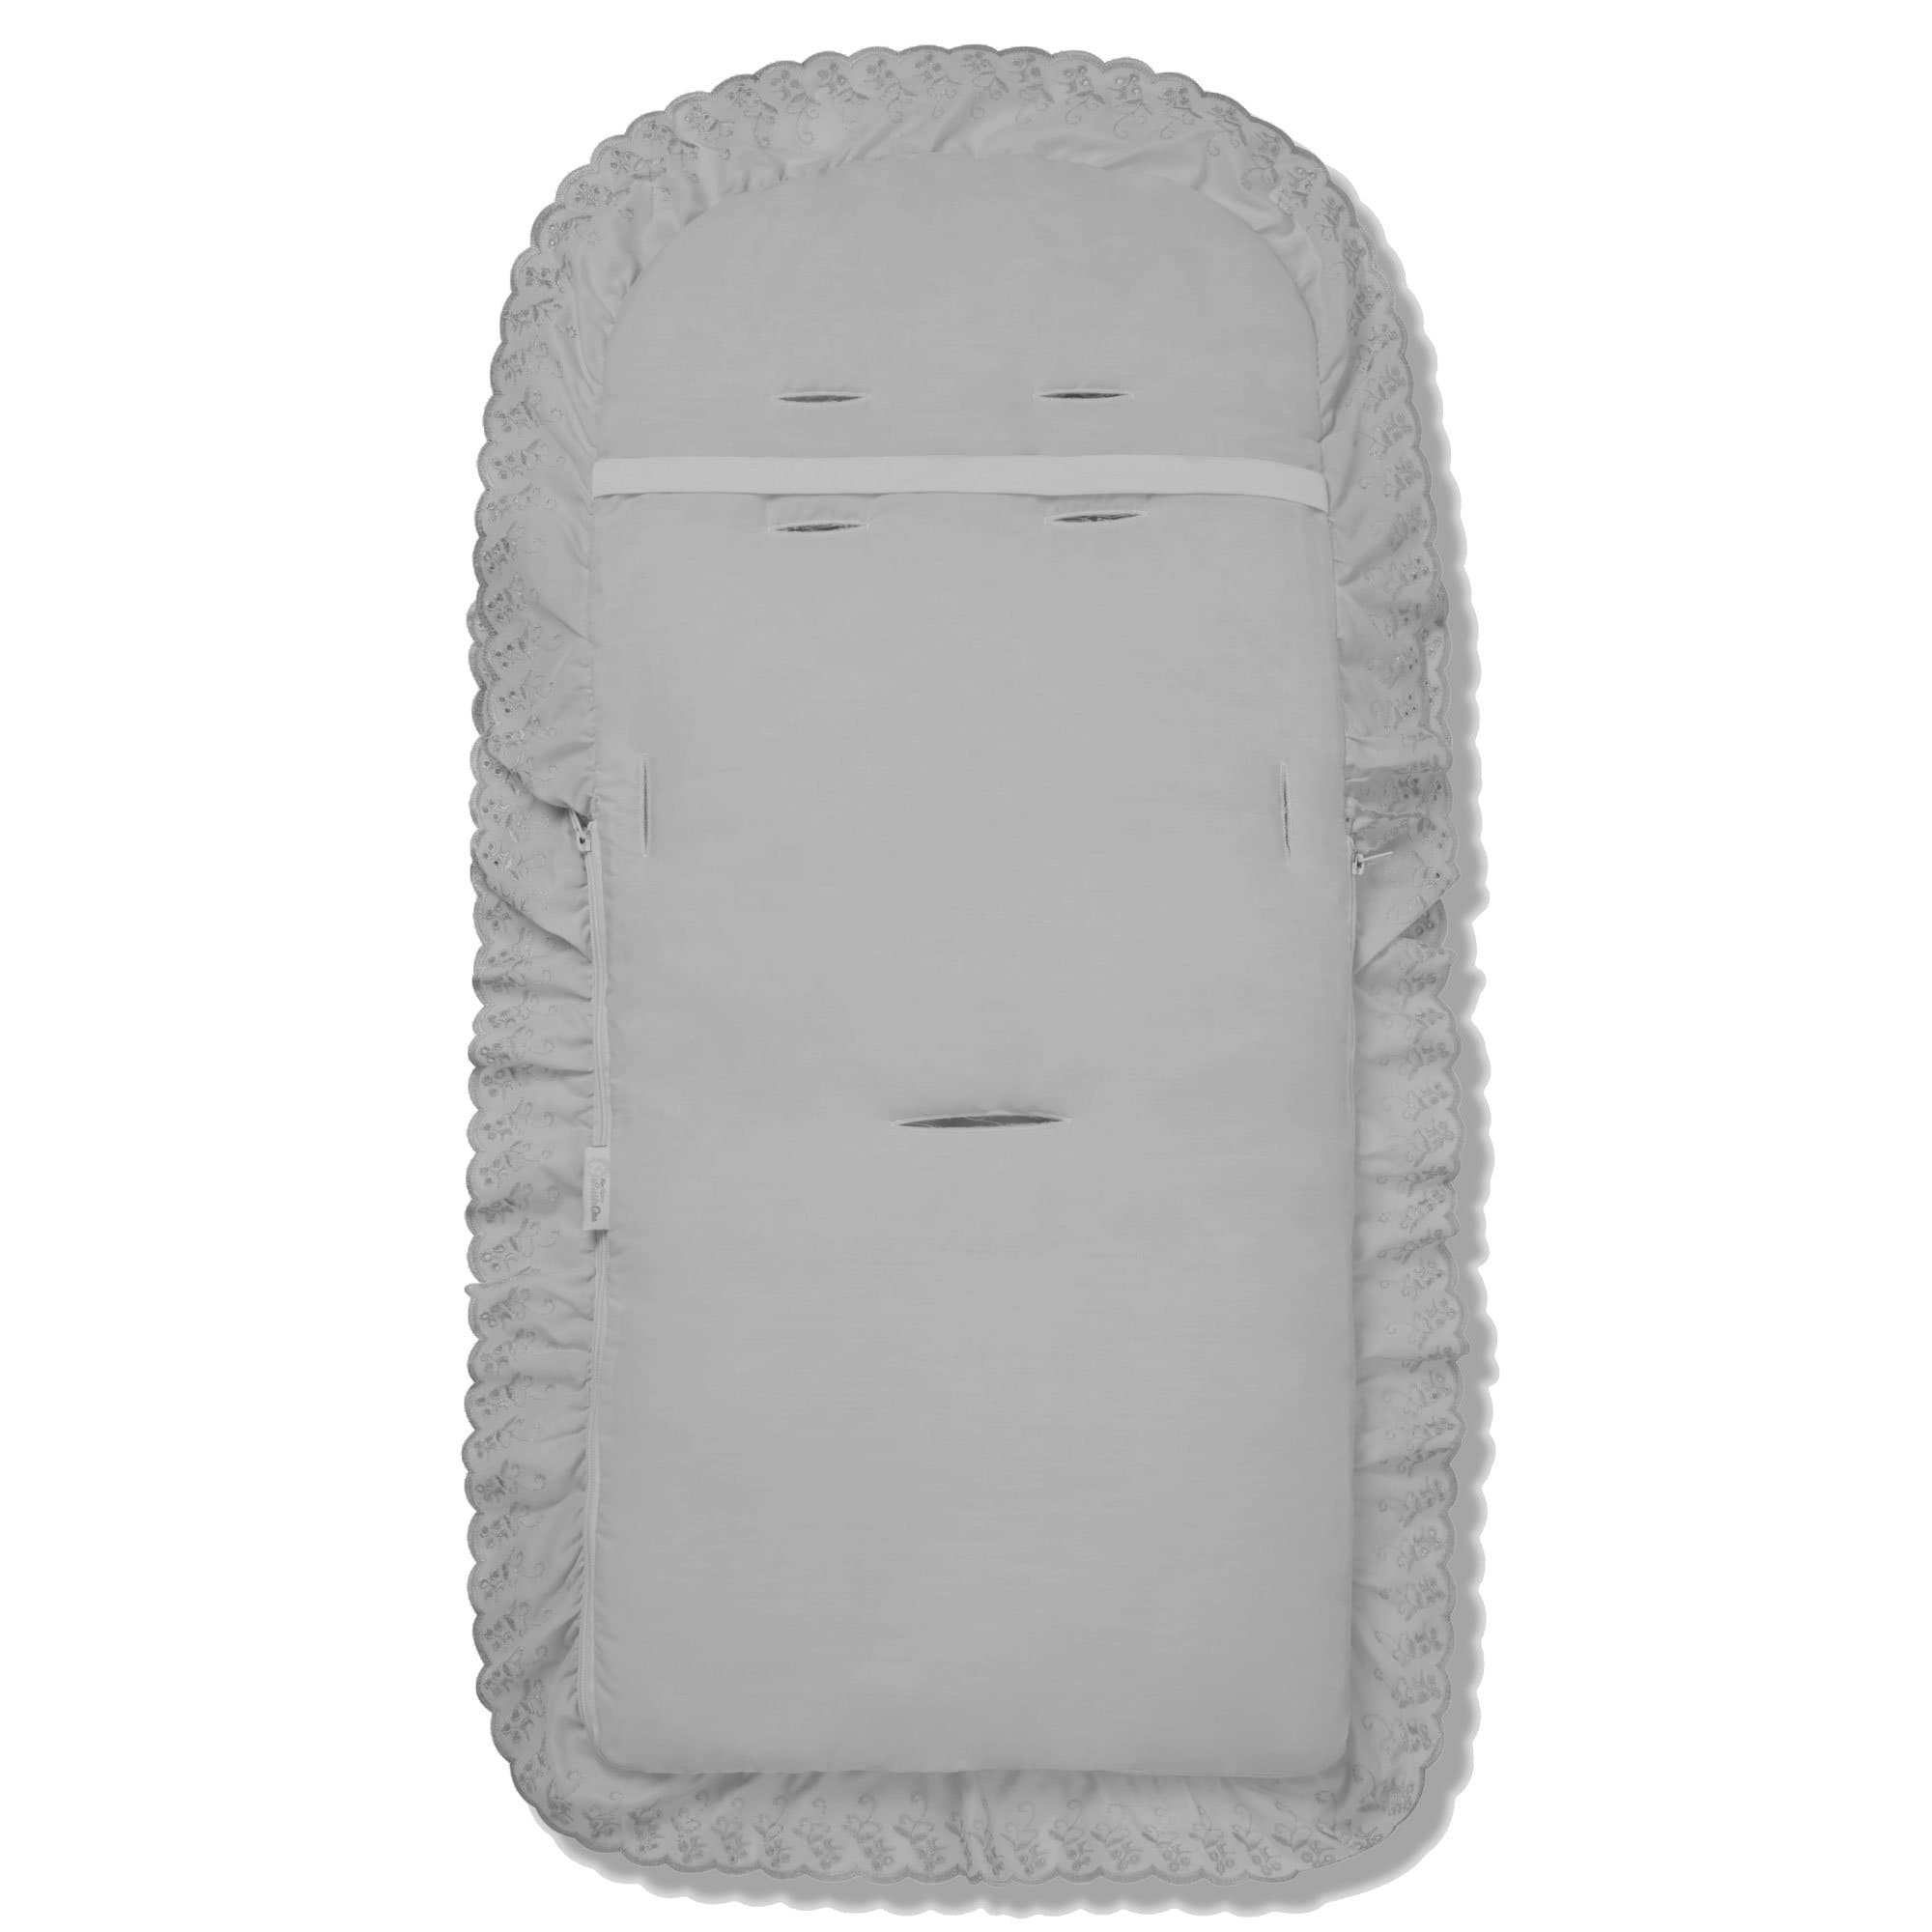 Broderie Anglaise Footmuff / Cosy Toes Compatible with Little Shield - For Your Little One